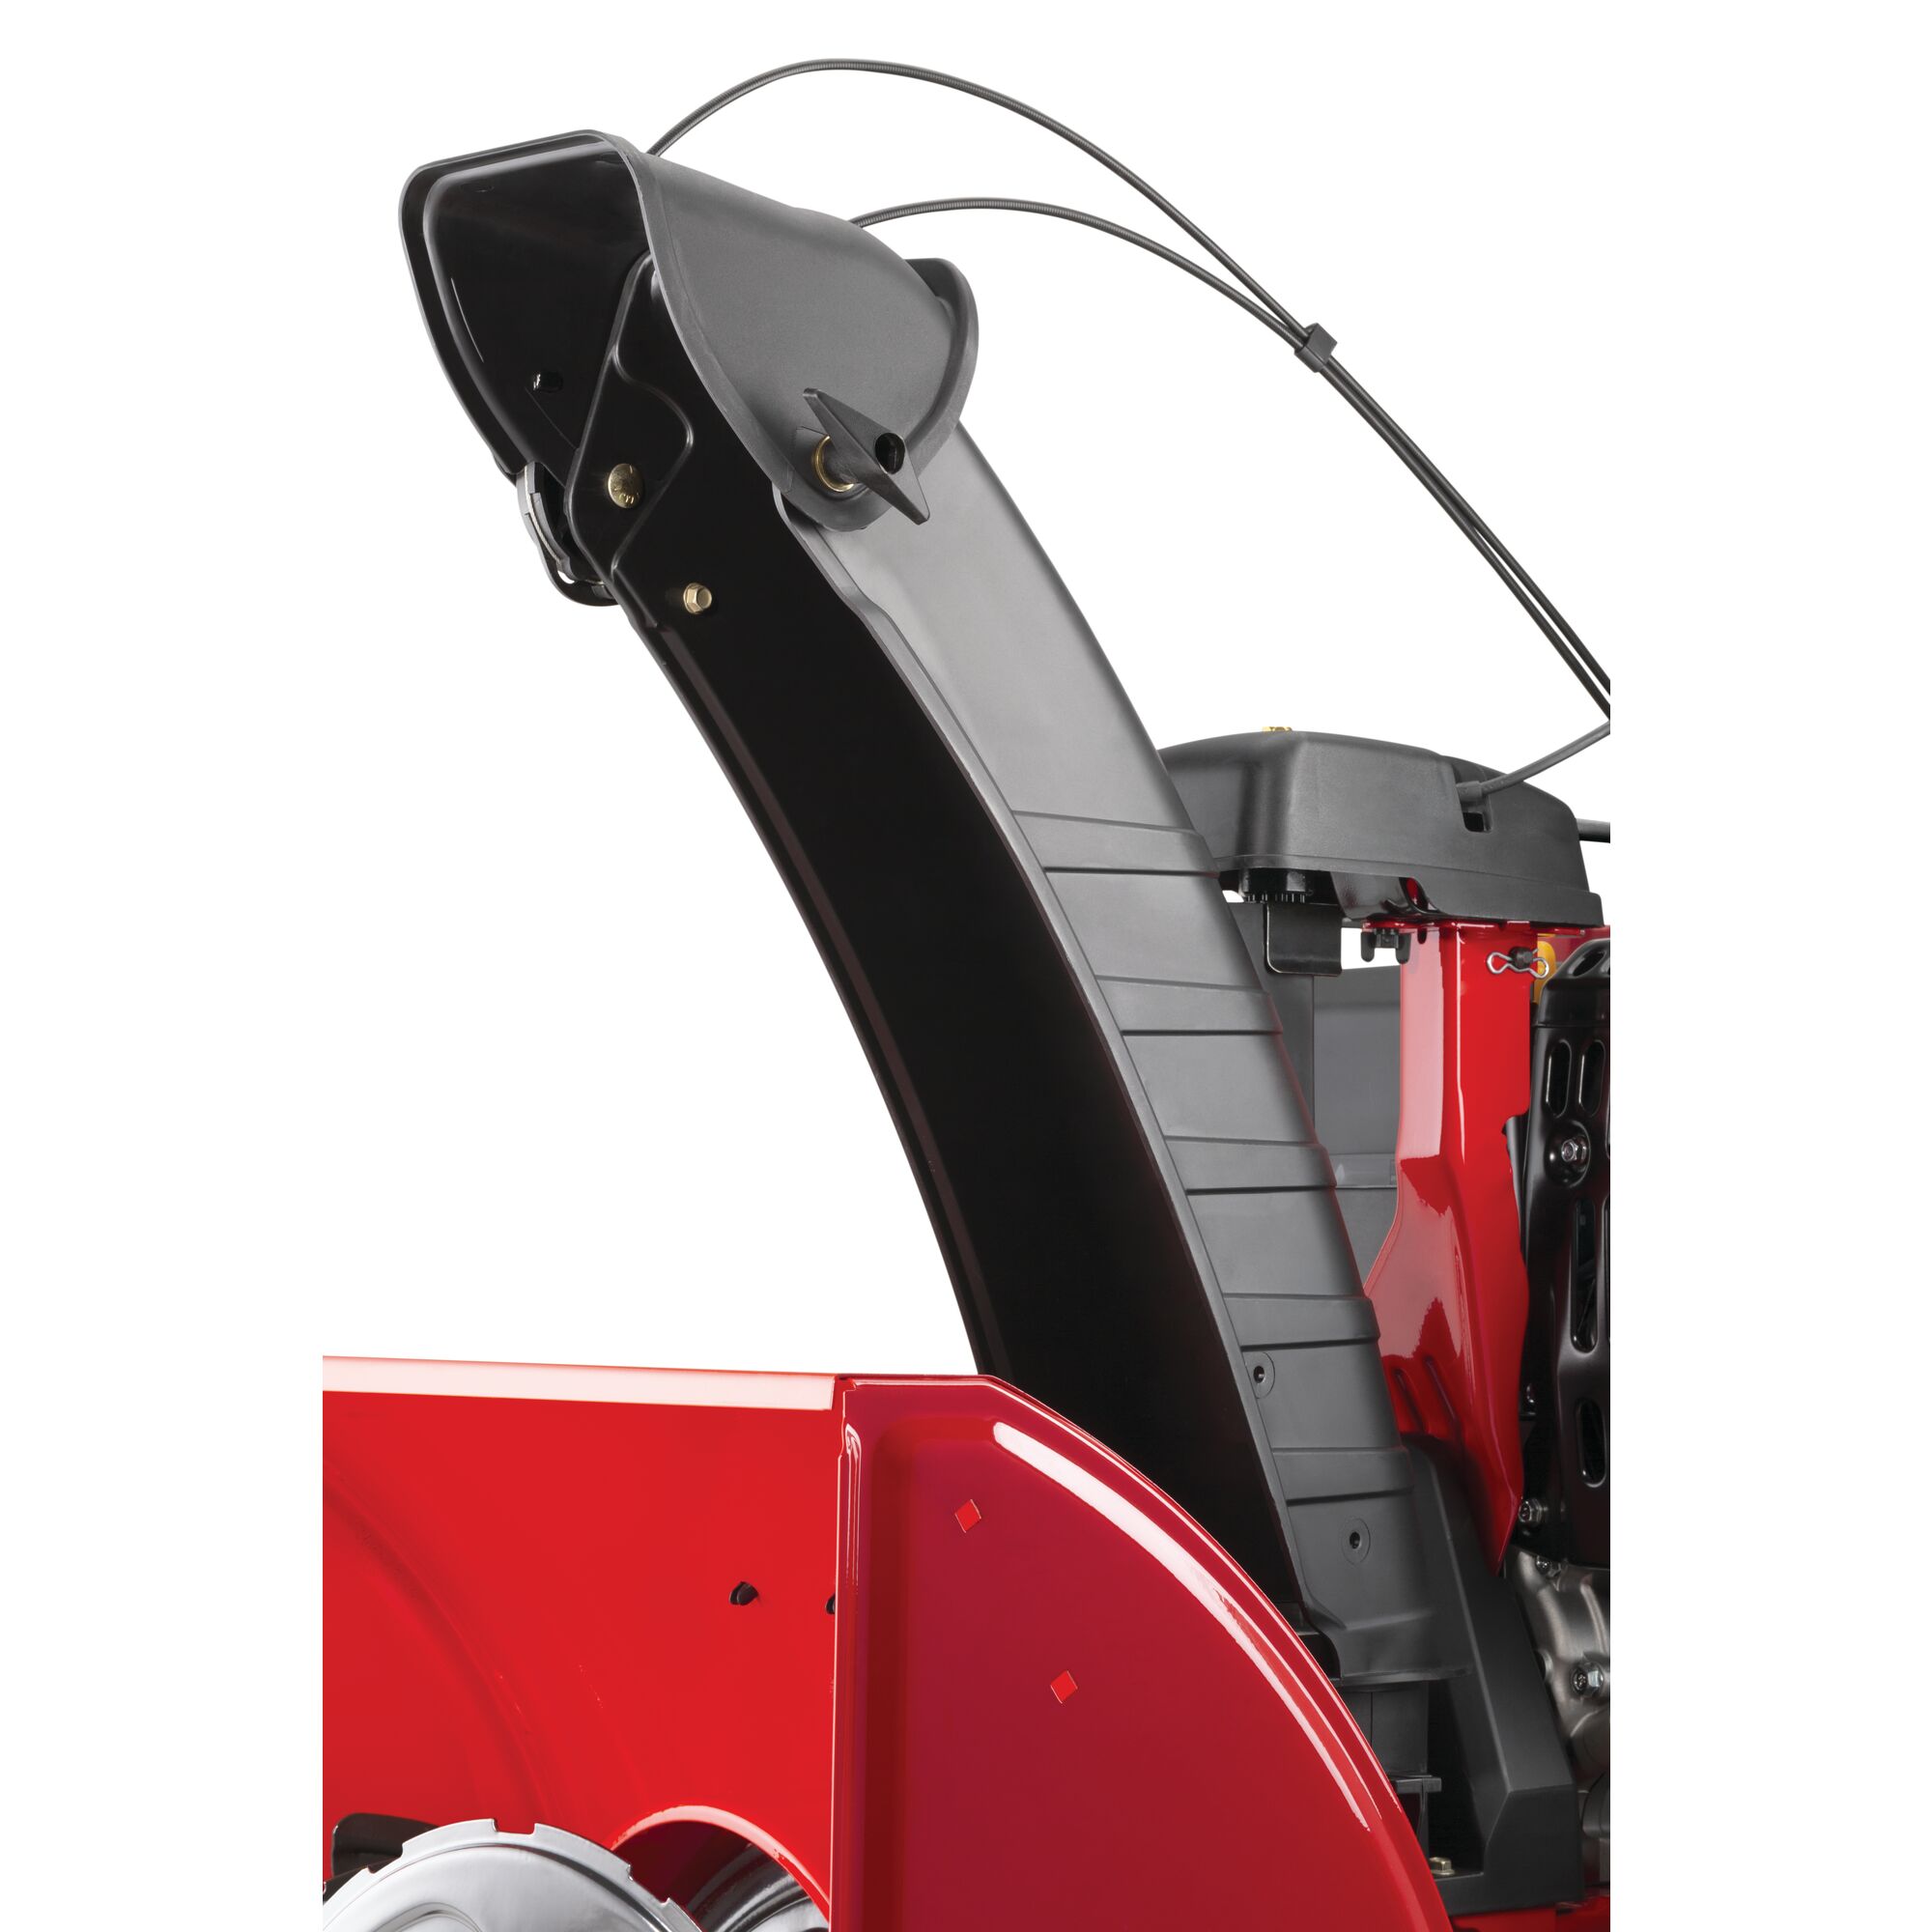 Extended chute control feature in 28 inch 357 CC electric start three stage snow blower.